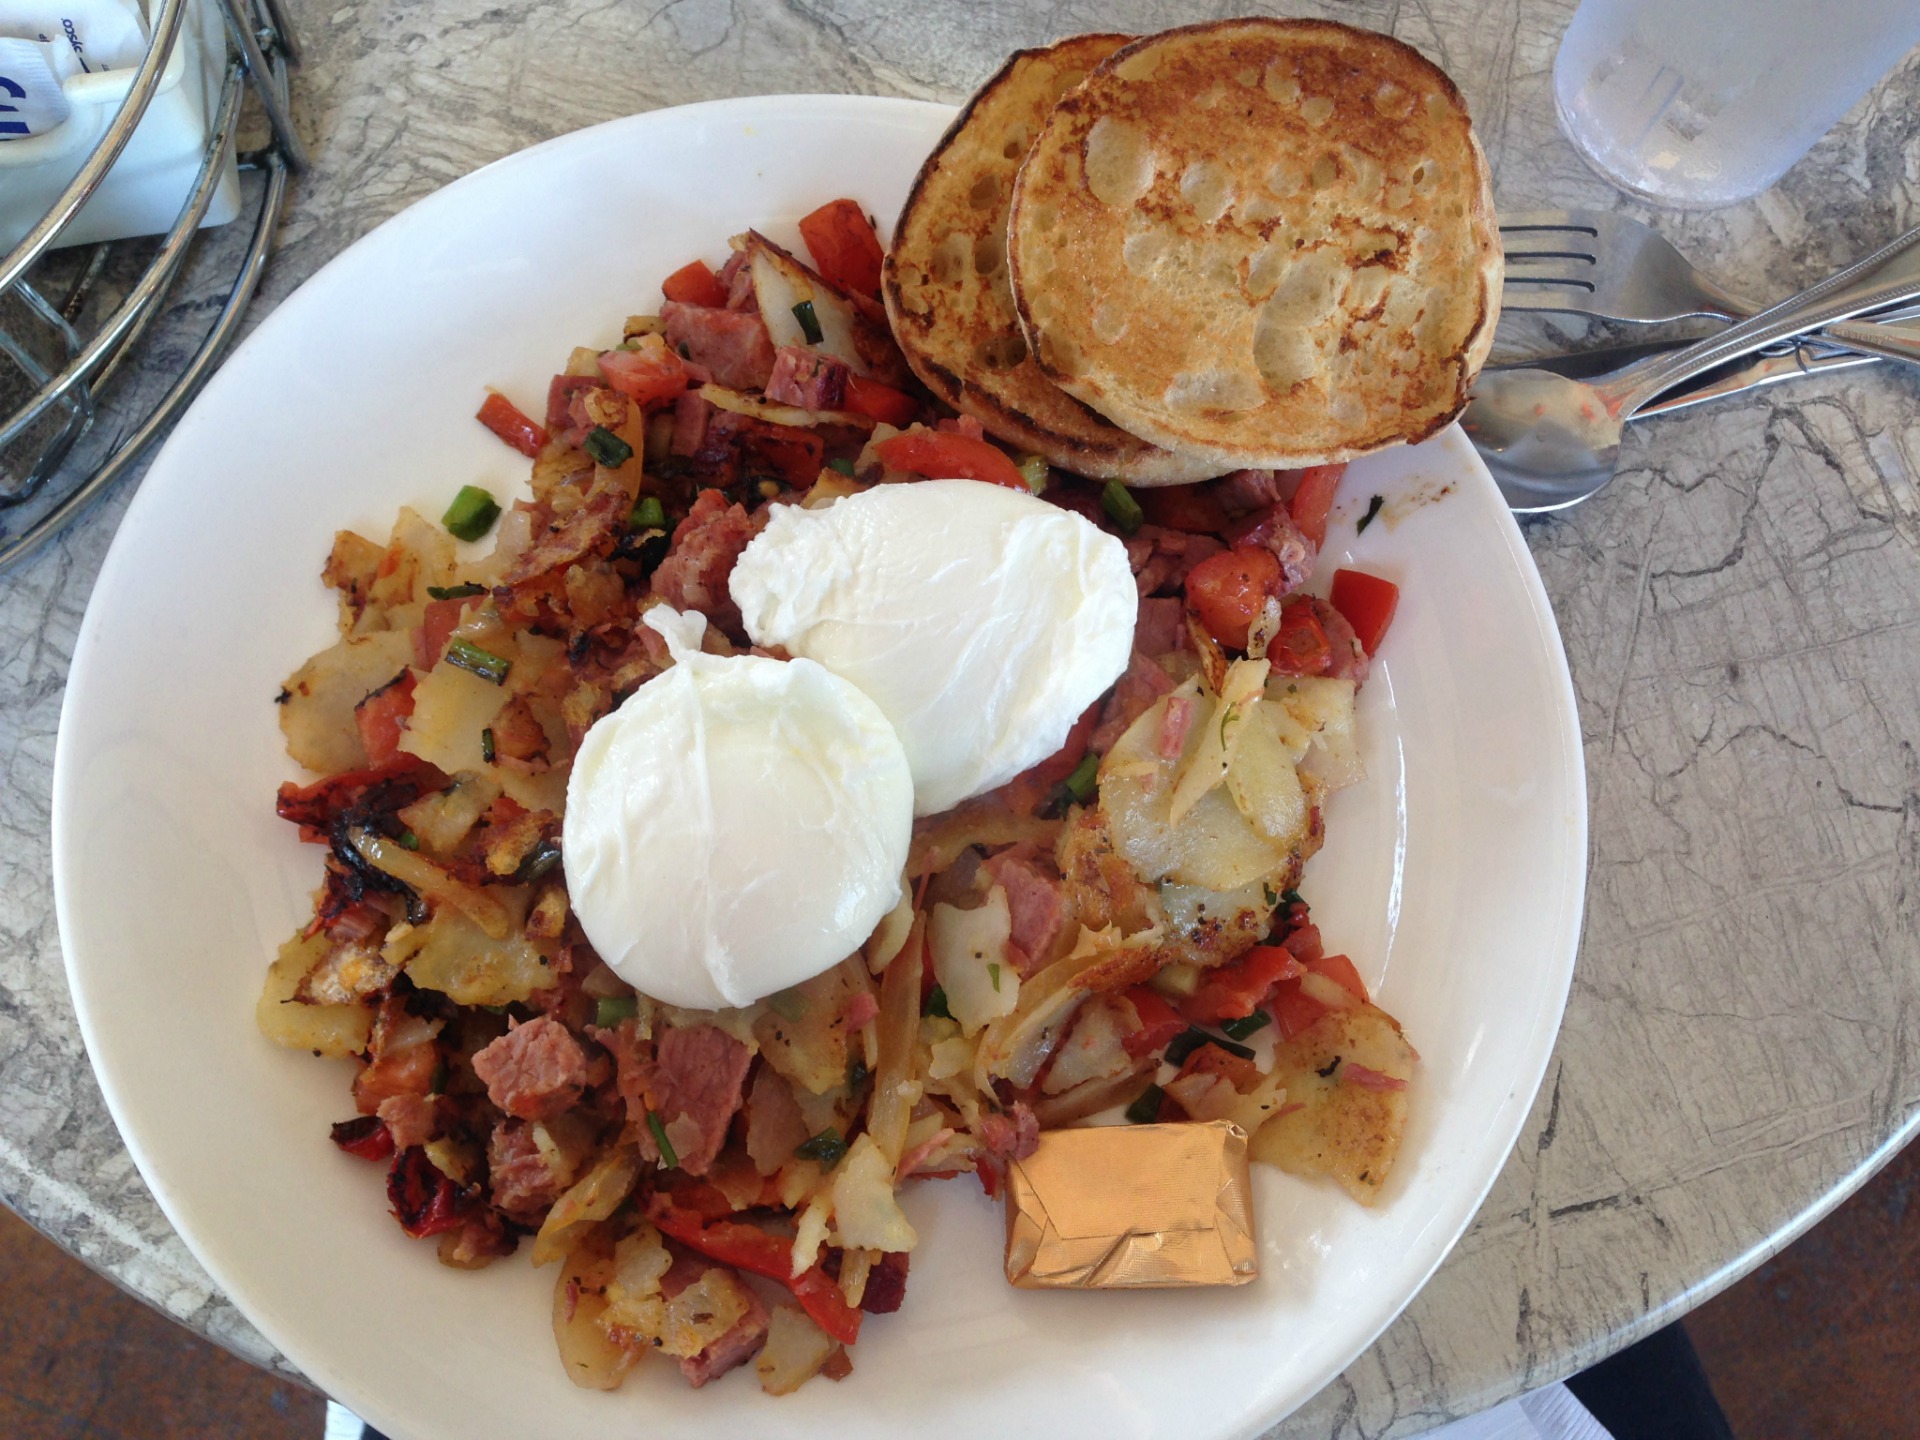 Corned beef hash at Cafe M